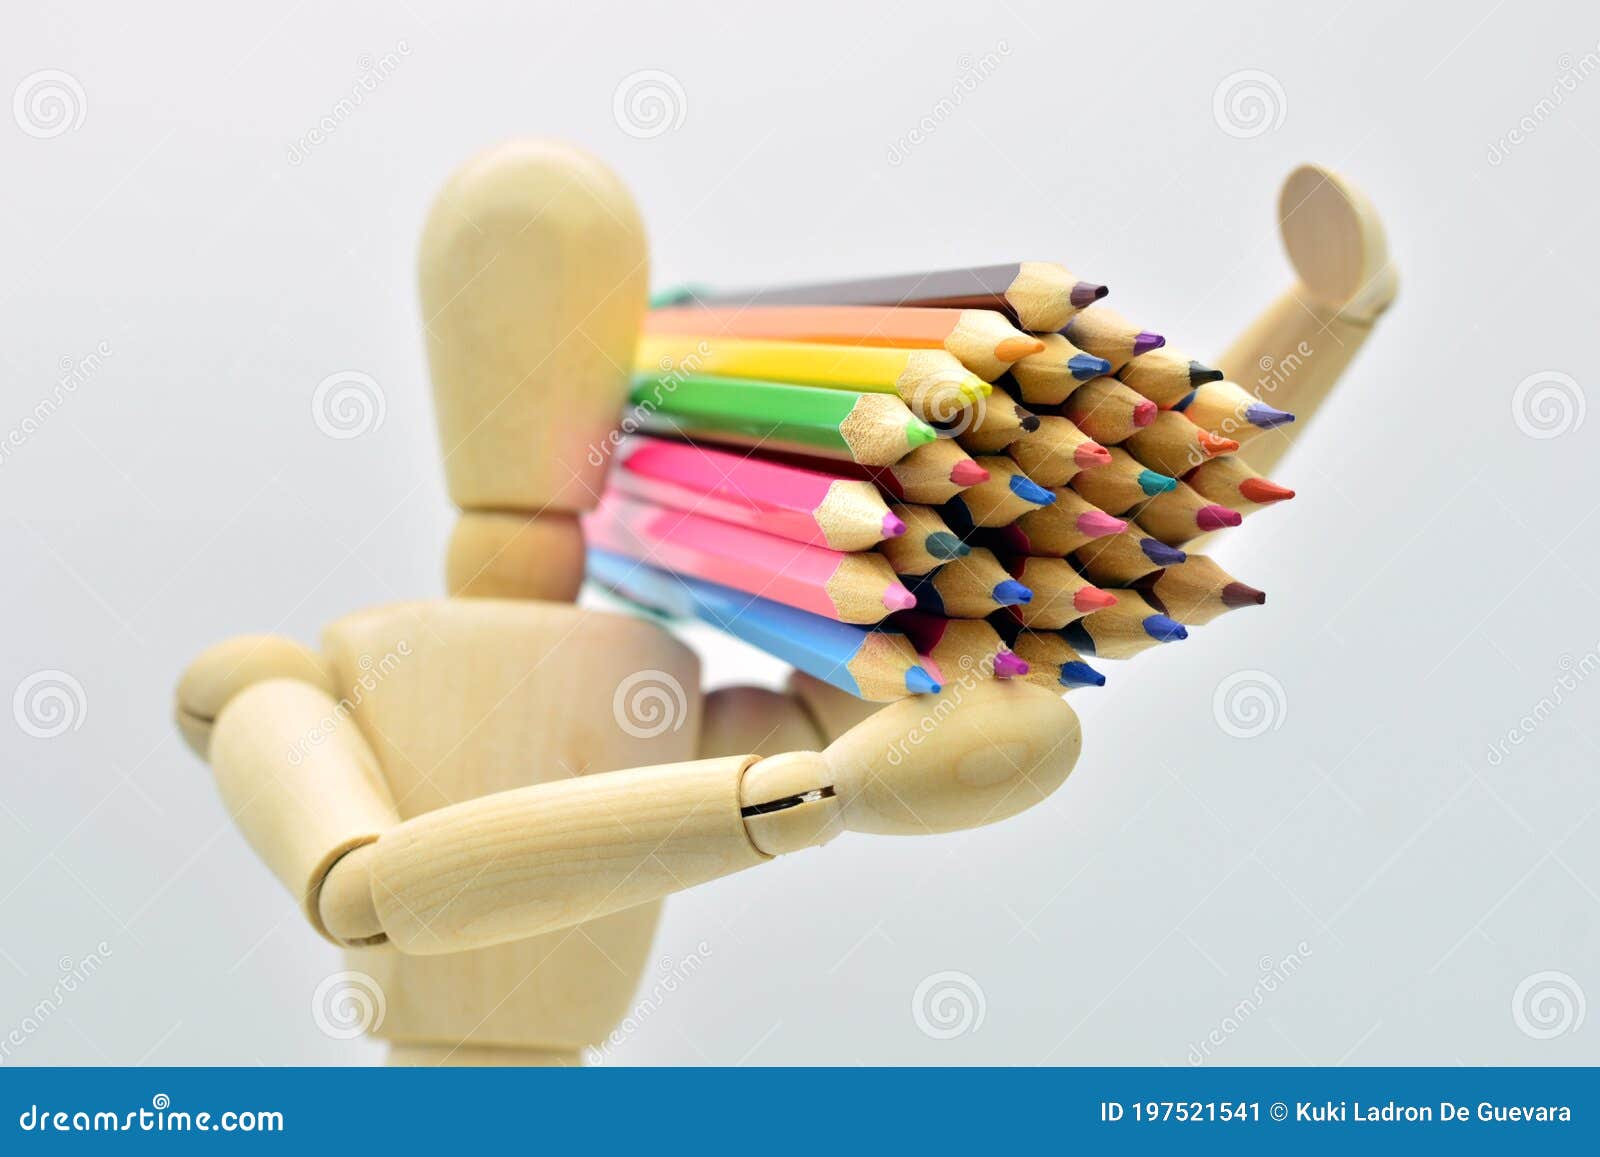 wooden mannequin loaded with colored pencils